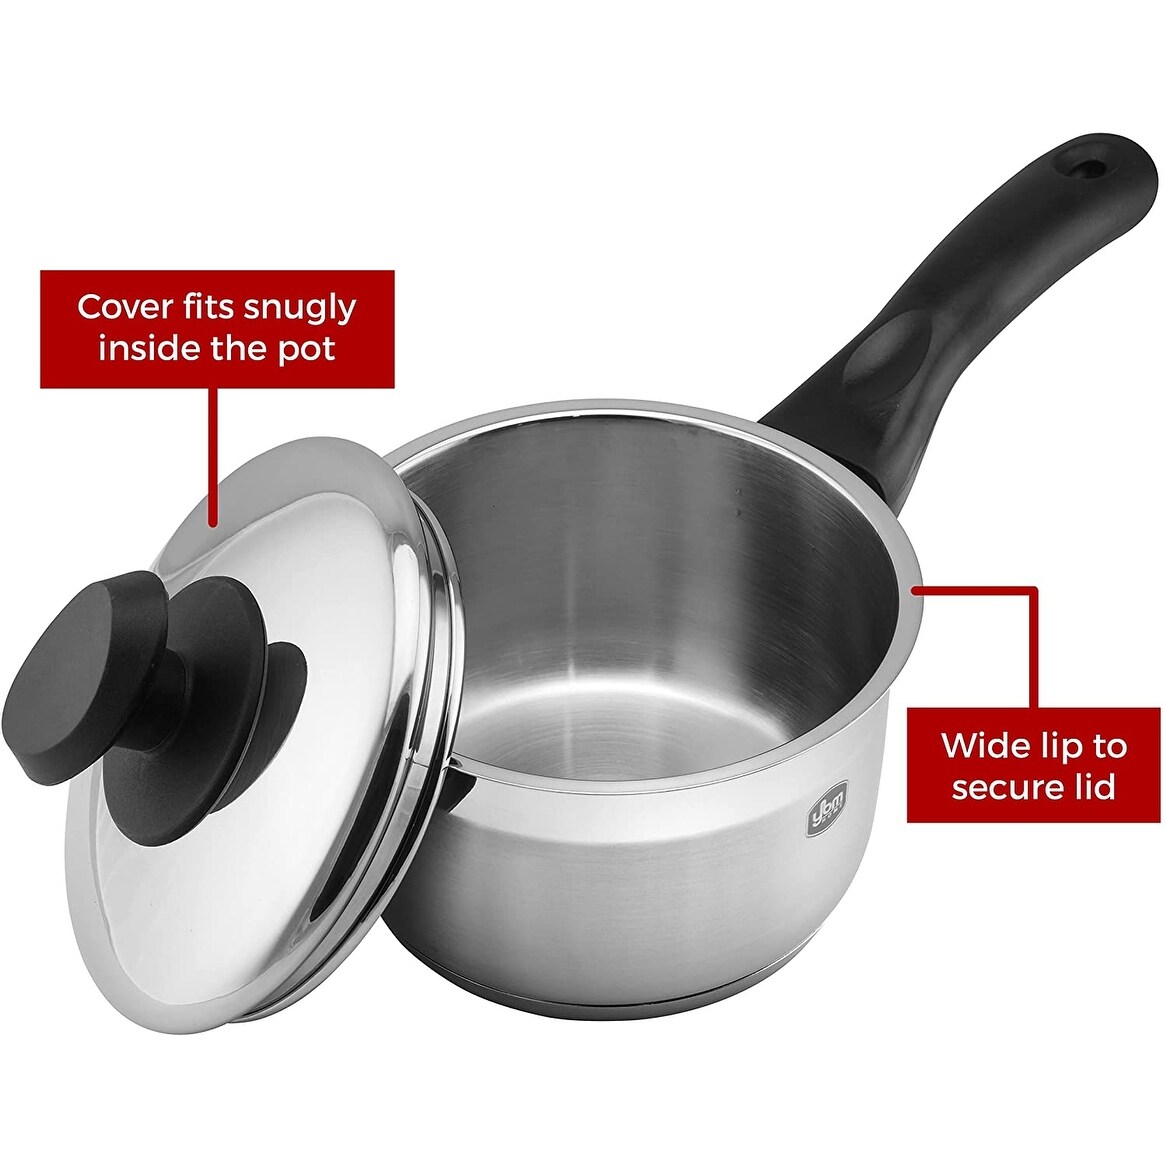 https://ak1.ostkcdn.com/images/products/is/images/direct/56f838f3ac06d39cba65b4d834b55499c46874d4/13-Piece-Cookware-Set%2Cincludes-Saucepans-Stockpot-and-Frying-Pan%2Cy1100.jpg